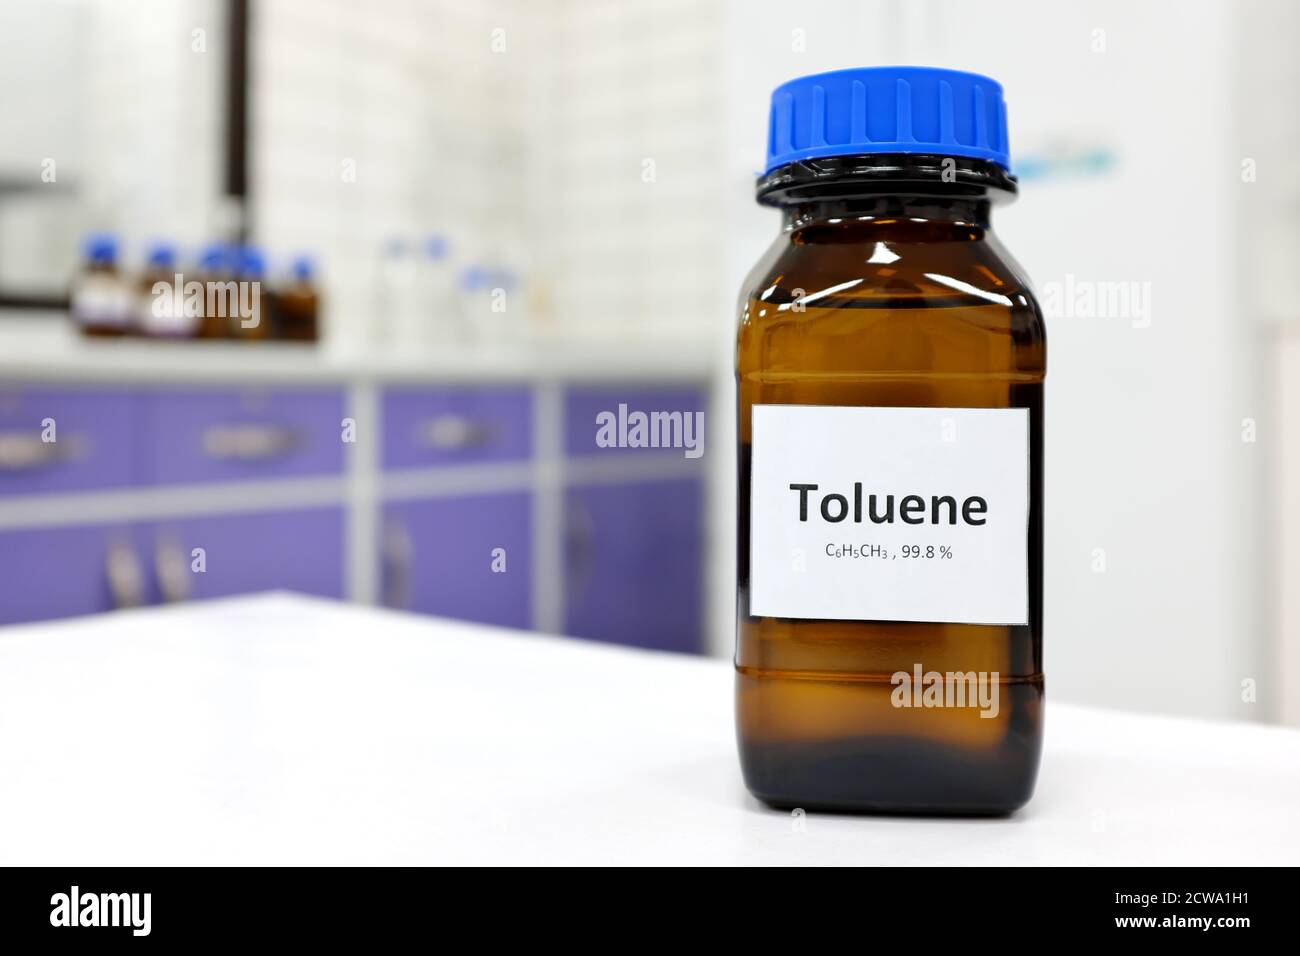 Selective focus of toluene liquid chemical compound in dark glass bottle inside a chemistry laboratory with copy space. Aromatic hydrocarbon used in petrochemical industry. Stock Photo